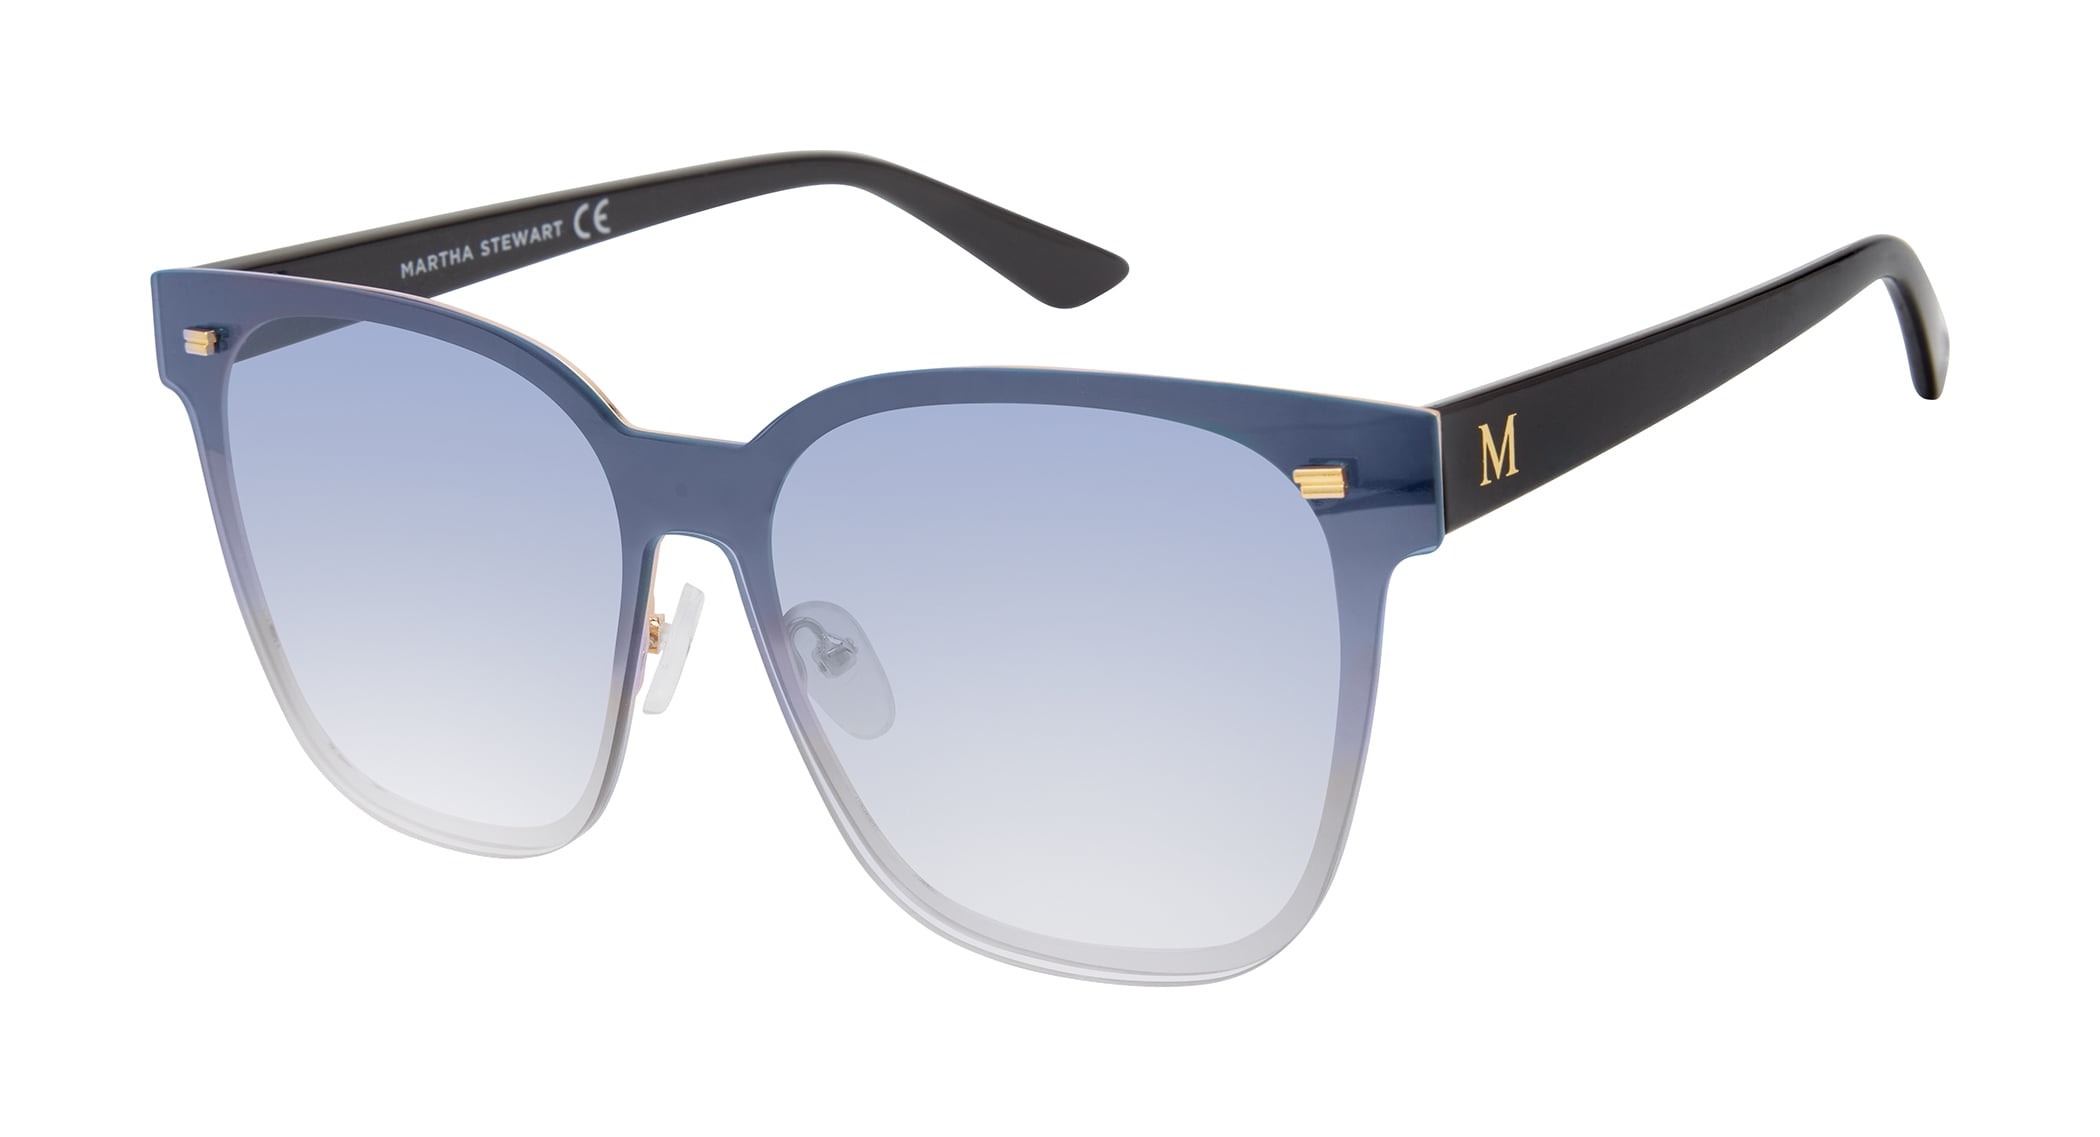 Martha Stewart MS140 Women's Shield UV400 Protective Square Sunglasses. Timeless Gifts, 148 mm, Blue